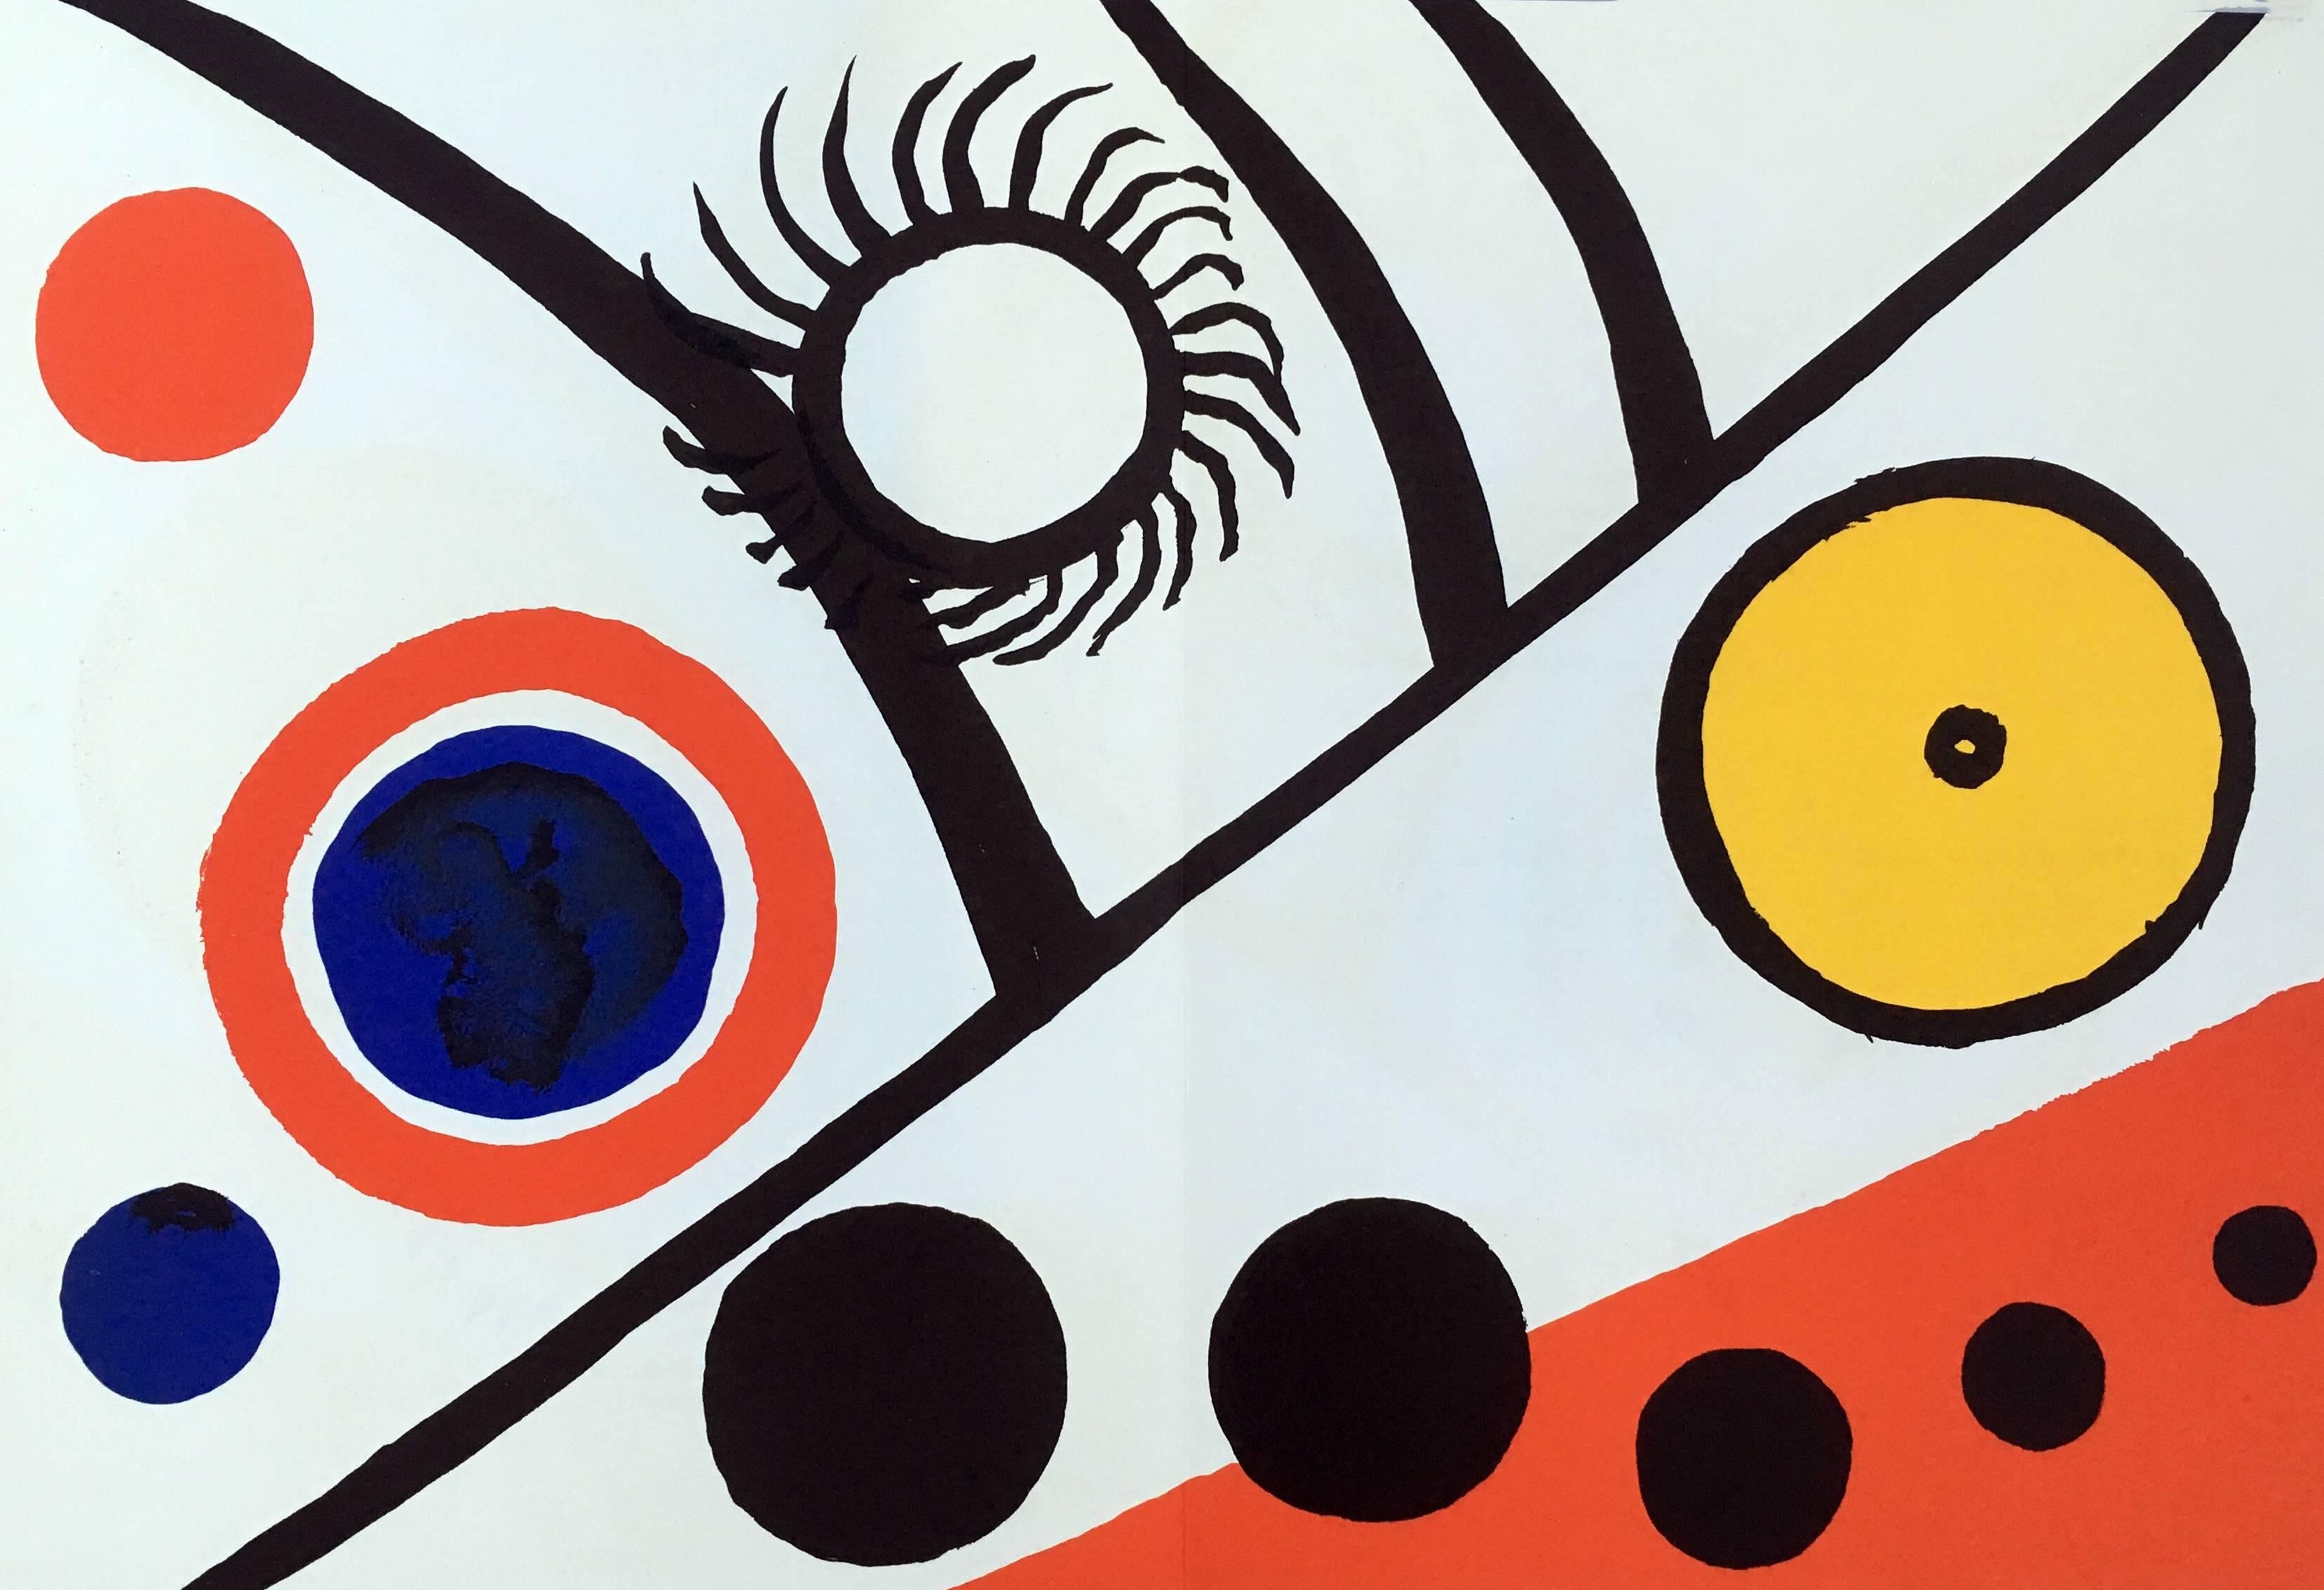 Alexander Calder Lithograph c. 1973 from Derrière le miroir:

Lithograph in colors; 15 x 22 inches.

Good overall vintage condition; contains center fold-line as originally issued; some bending to upper right & left corners. 

Unsigned from an